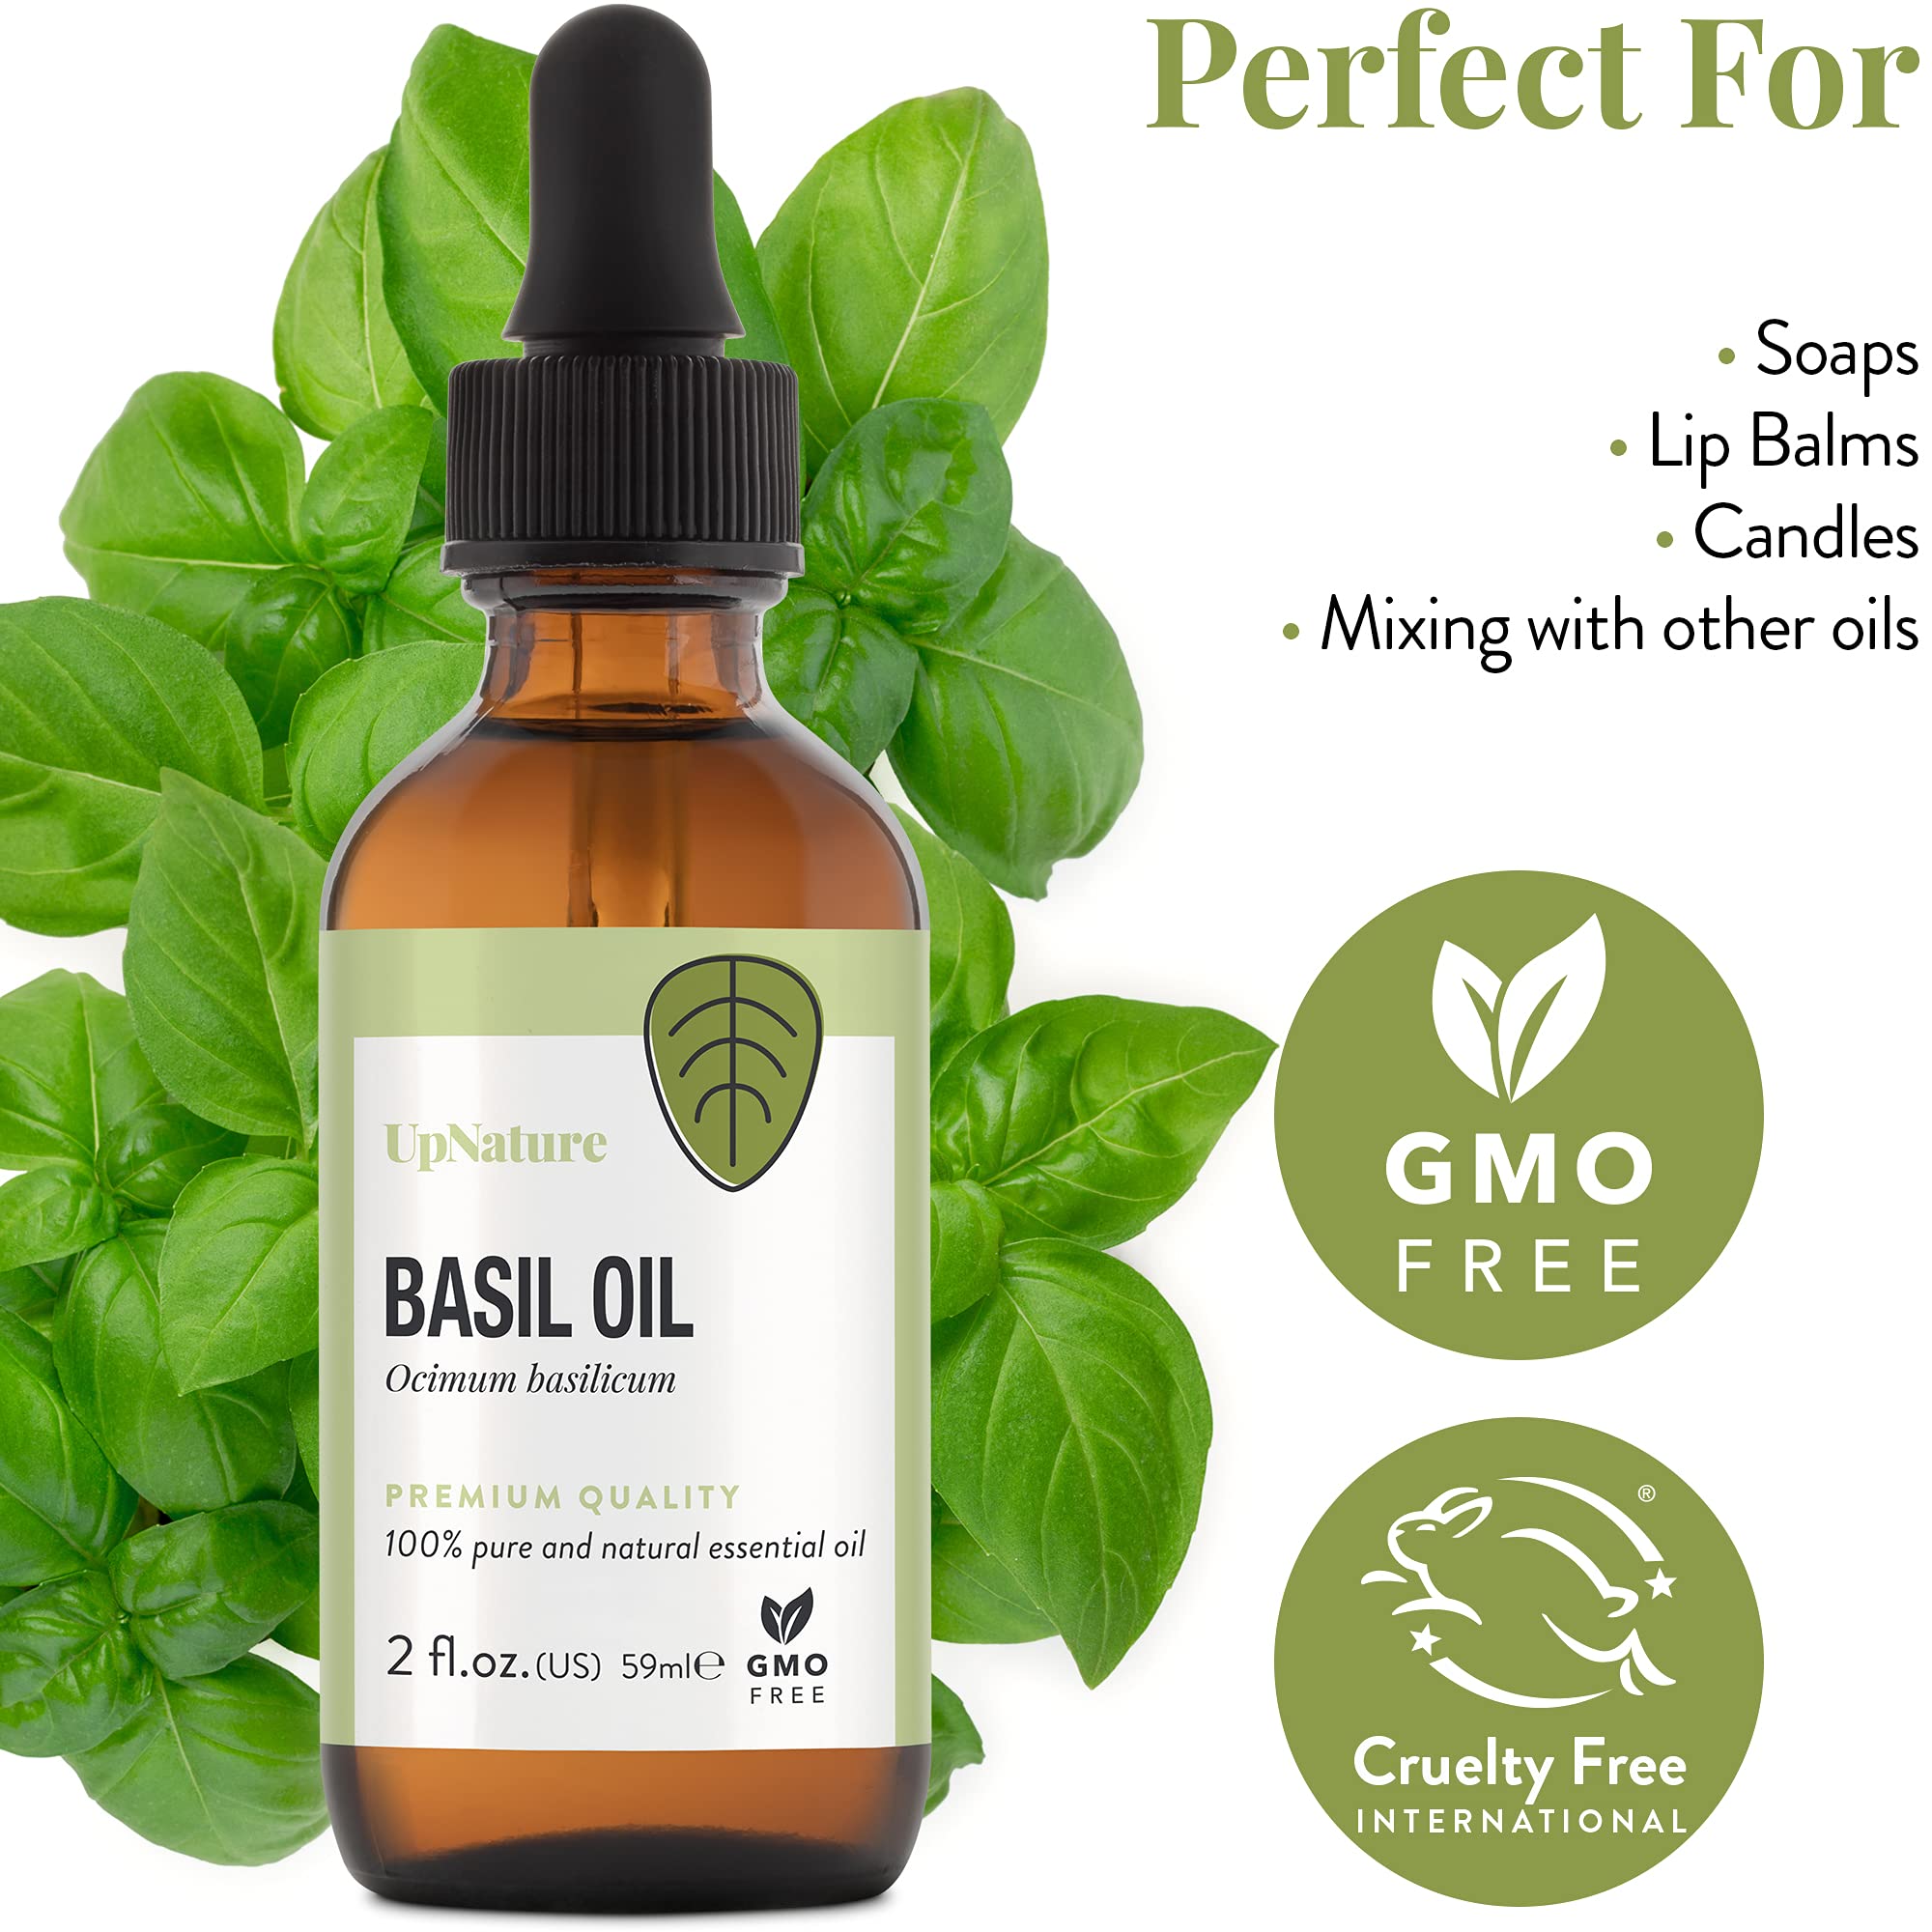 UpNature Basil Essential Oil - 100% Natural & Pure, Undiluted, Premium Quality Aromatherapy Oil- Basil Oil for Skin, Strengthen Hair & Stimulates Scalp, Relieves Congestion & Muscle Discomfort, 2oz